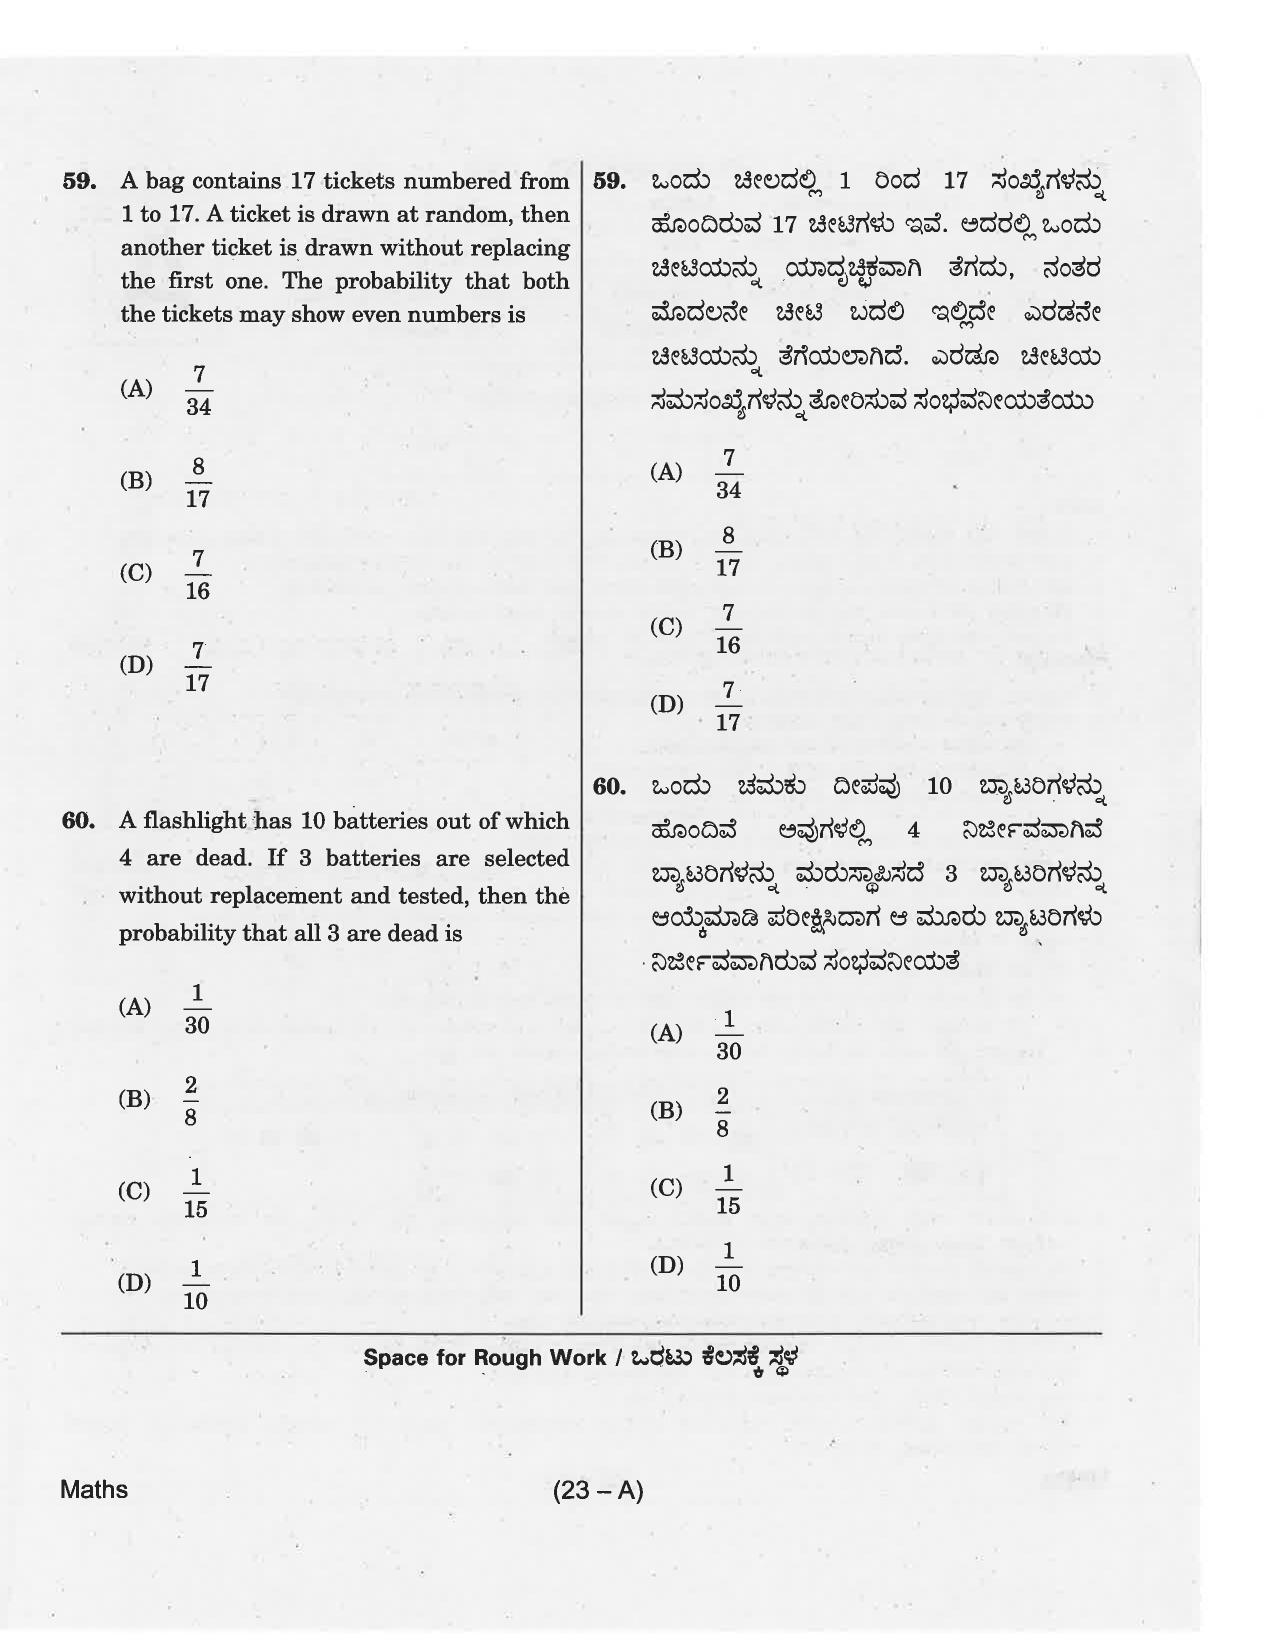 KCET Mathematics 2018 Question Papers - Page 23